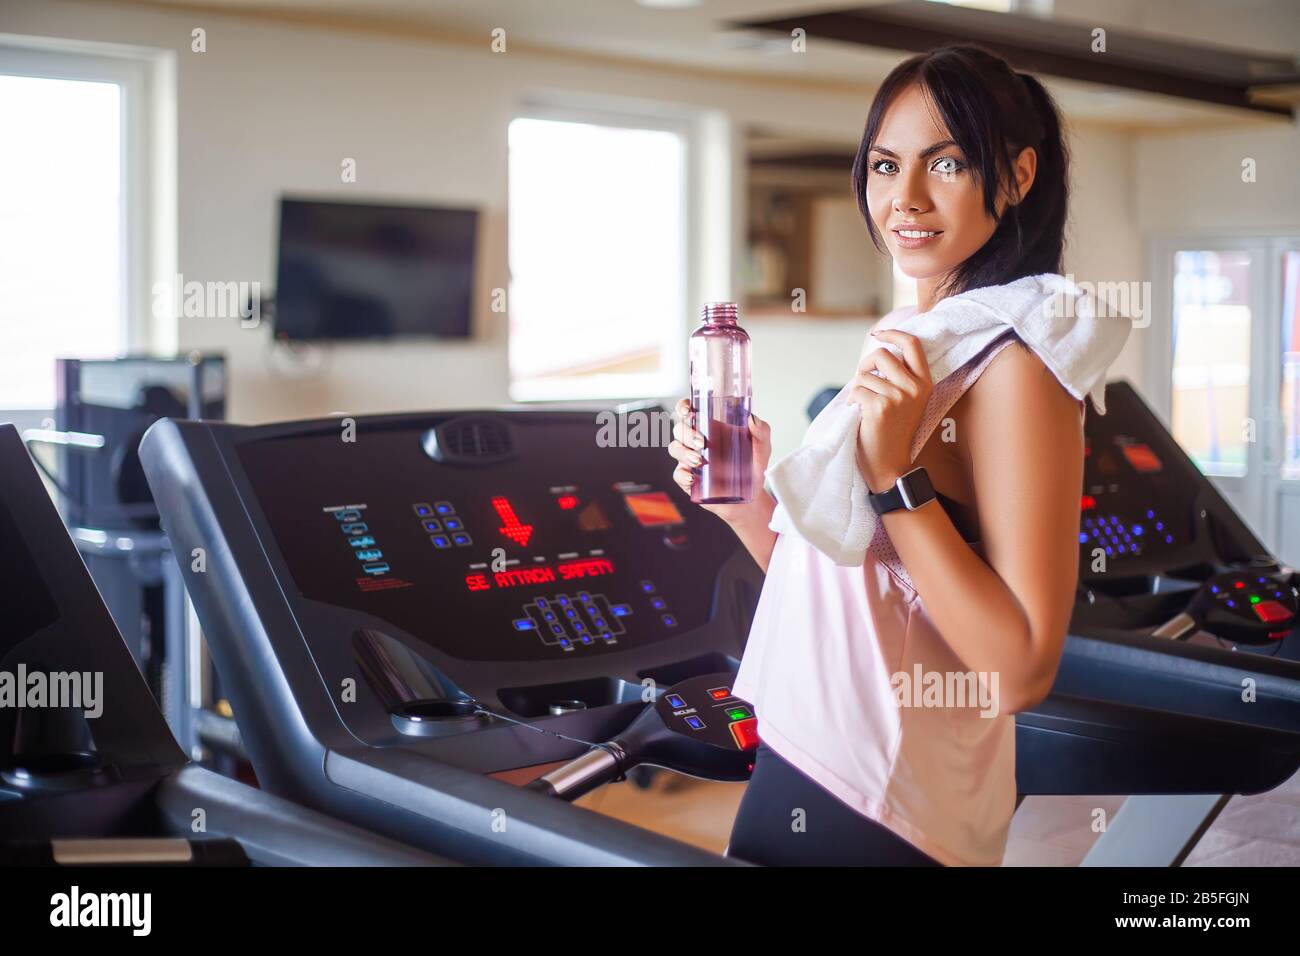 Pretty woman doing physical exercises in gym Stock Photo